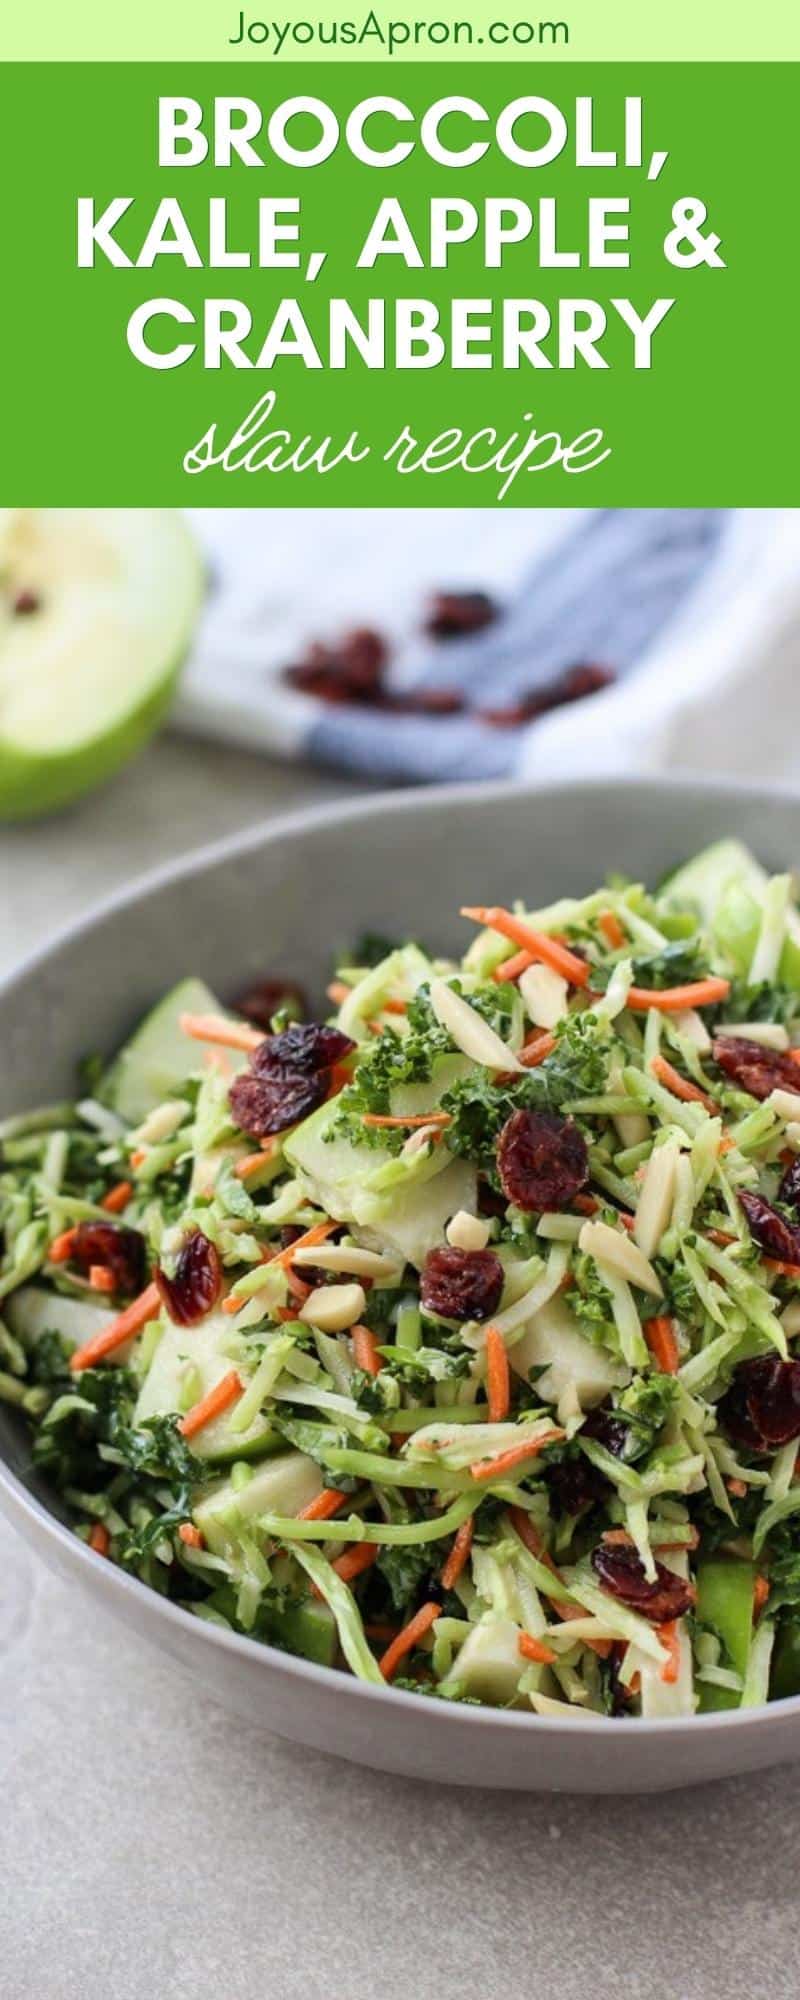 Broccoli, Kale, Apple and Cranberry Slaw - The perfect light and healthy veggie side to your holiday meal or any day dinner! Broccoli, kale, apples, dried cranberries and carrots are tossed in a tangy and light vinaigrette dressing via @joyousapron